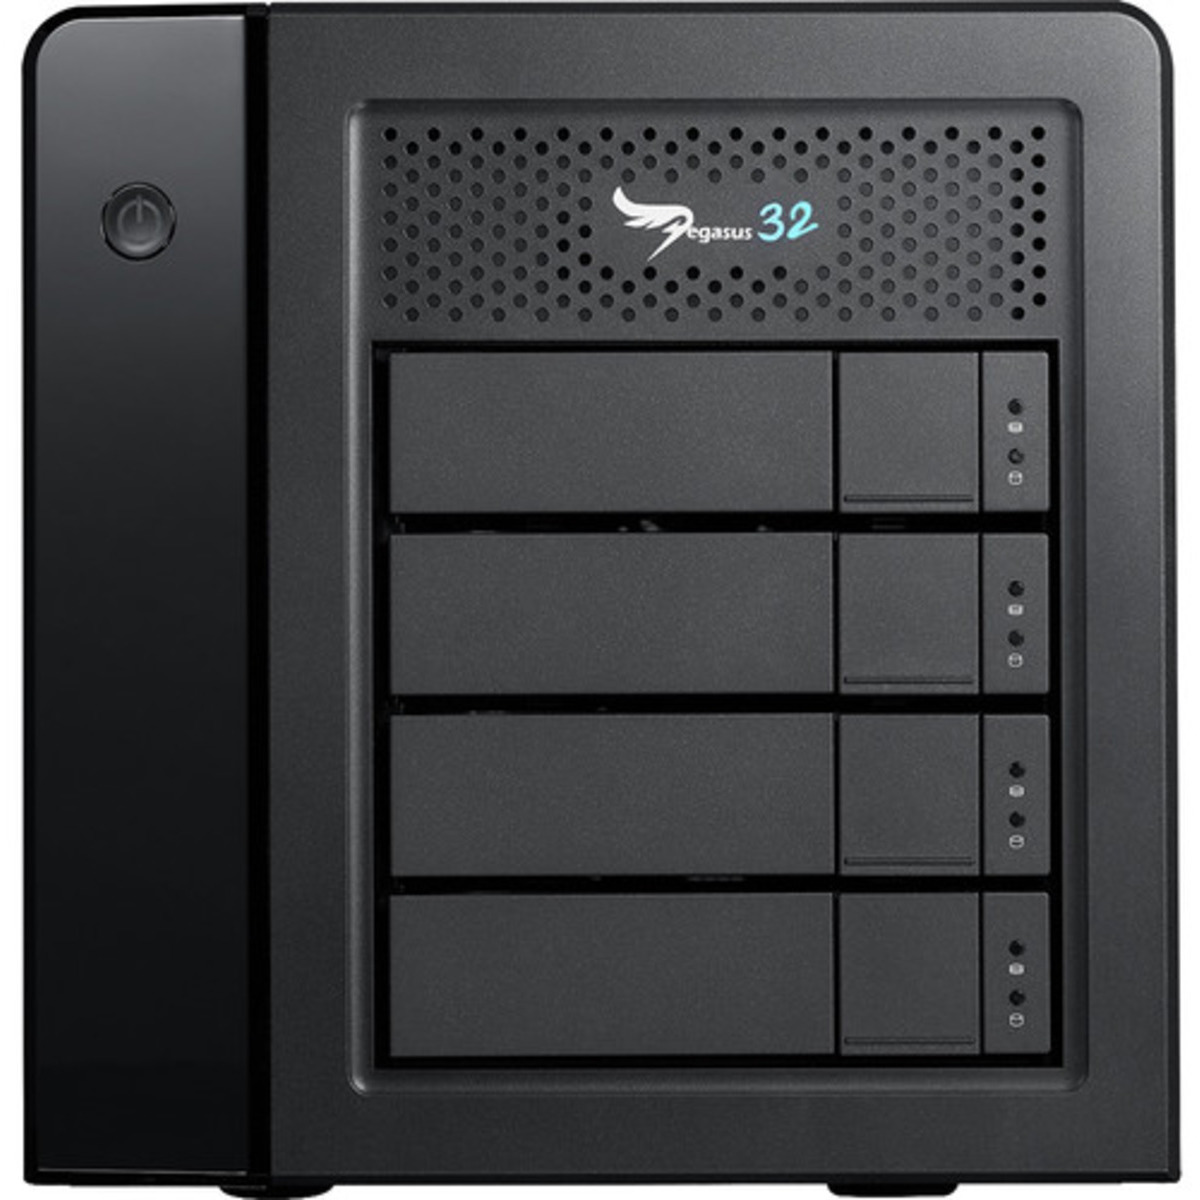 Promise Technology Pegasus32 R4 Thunderbolt 3 56tb 4-Bay Desktop Multimedia / Power User / Business DAS - Direct Attached Storage Device 4x14tb Seagate IronWolf Pro ST14000NT001 3.5 7200rpm SATA 6Gb/s HDD NAS Class Drives Installed - Burn-In Tested Pegasus32 R4 Thunderbolt 3